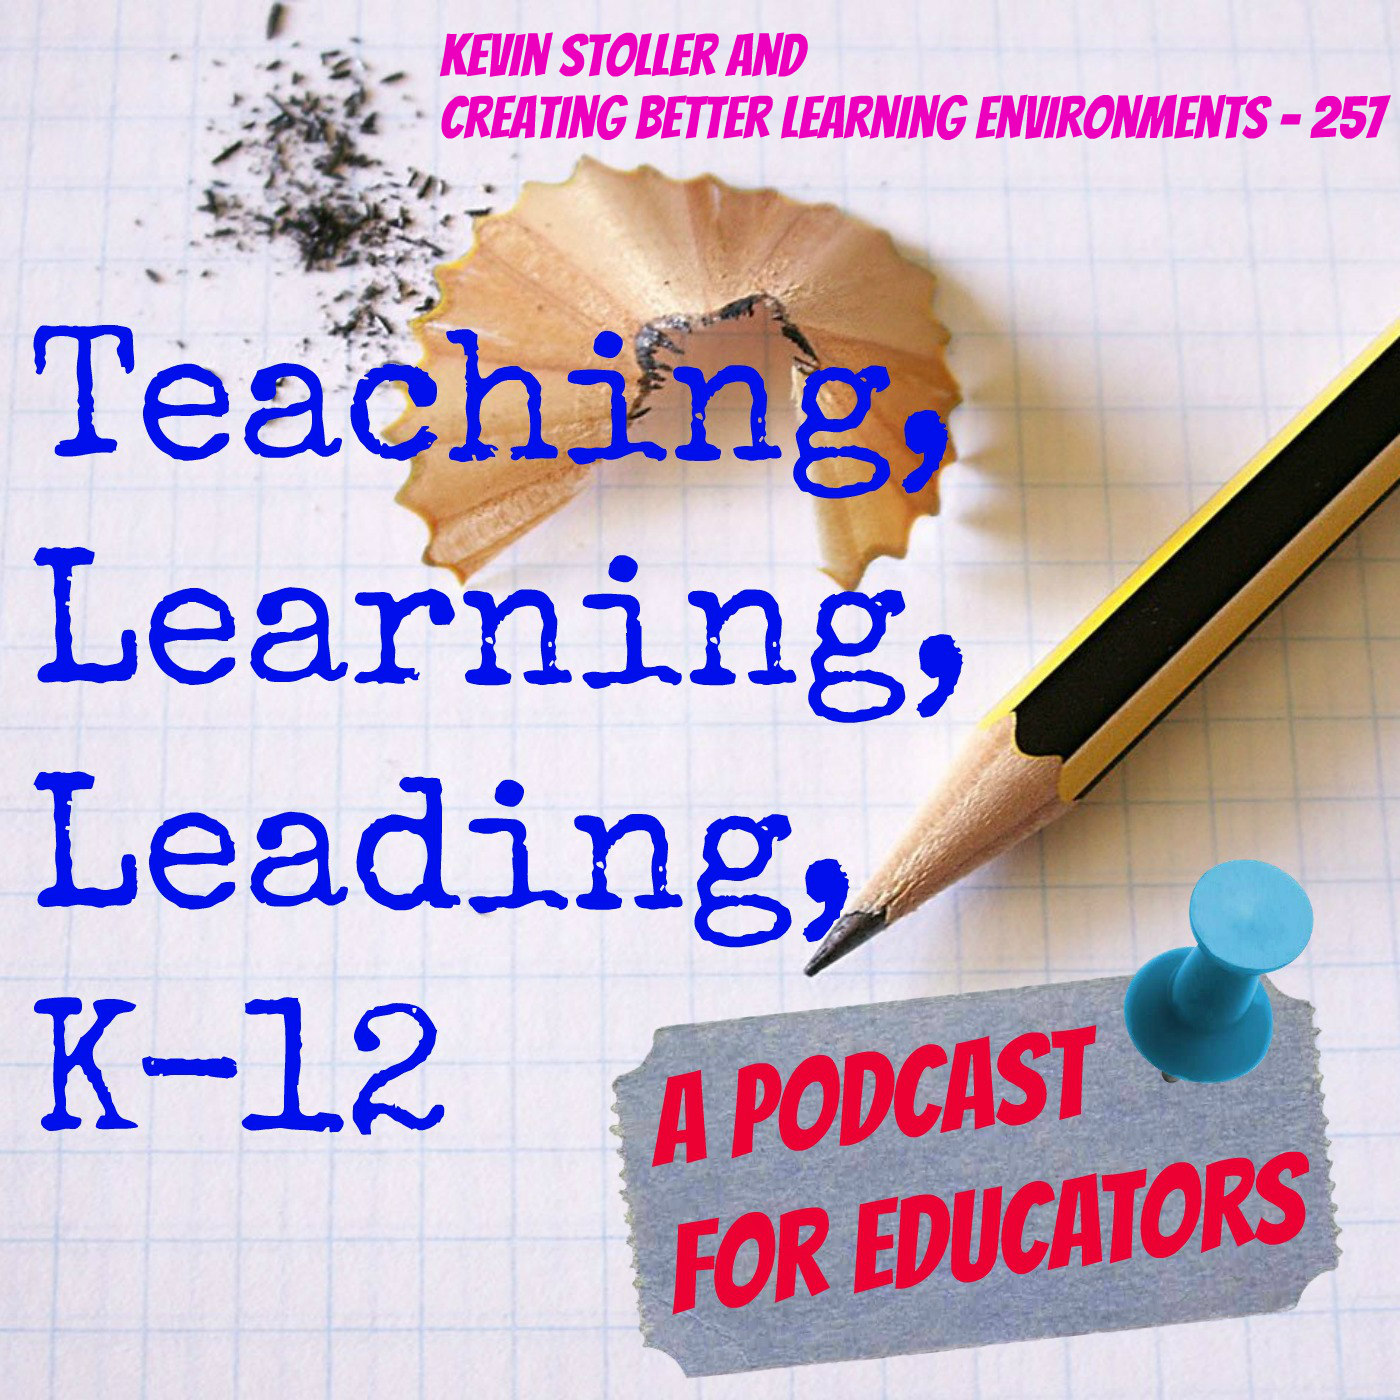 Kevin Stoller and Creating Better Learning Environments - 257